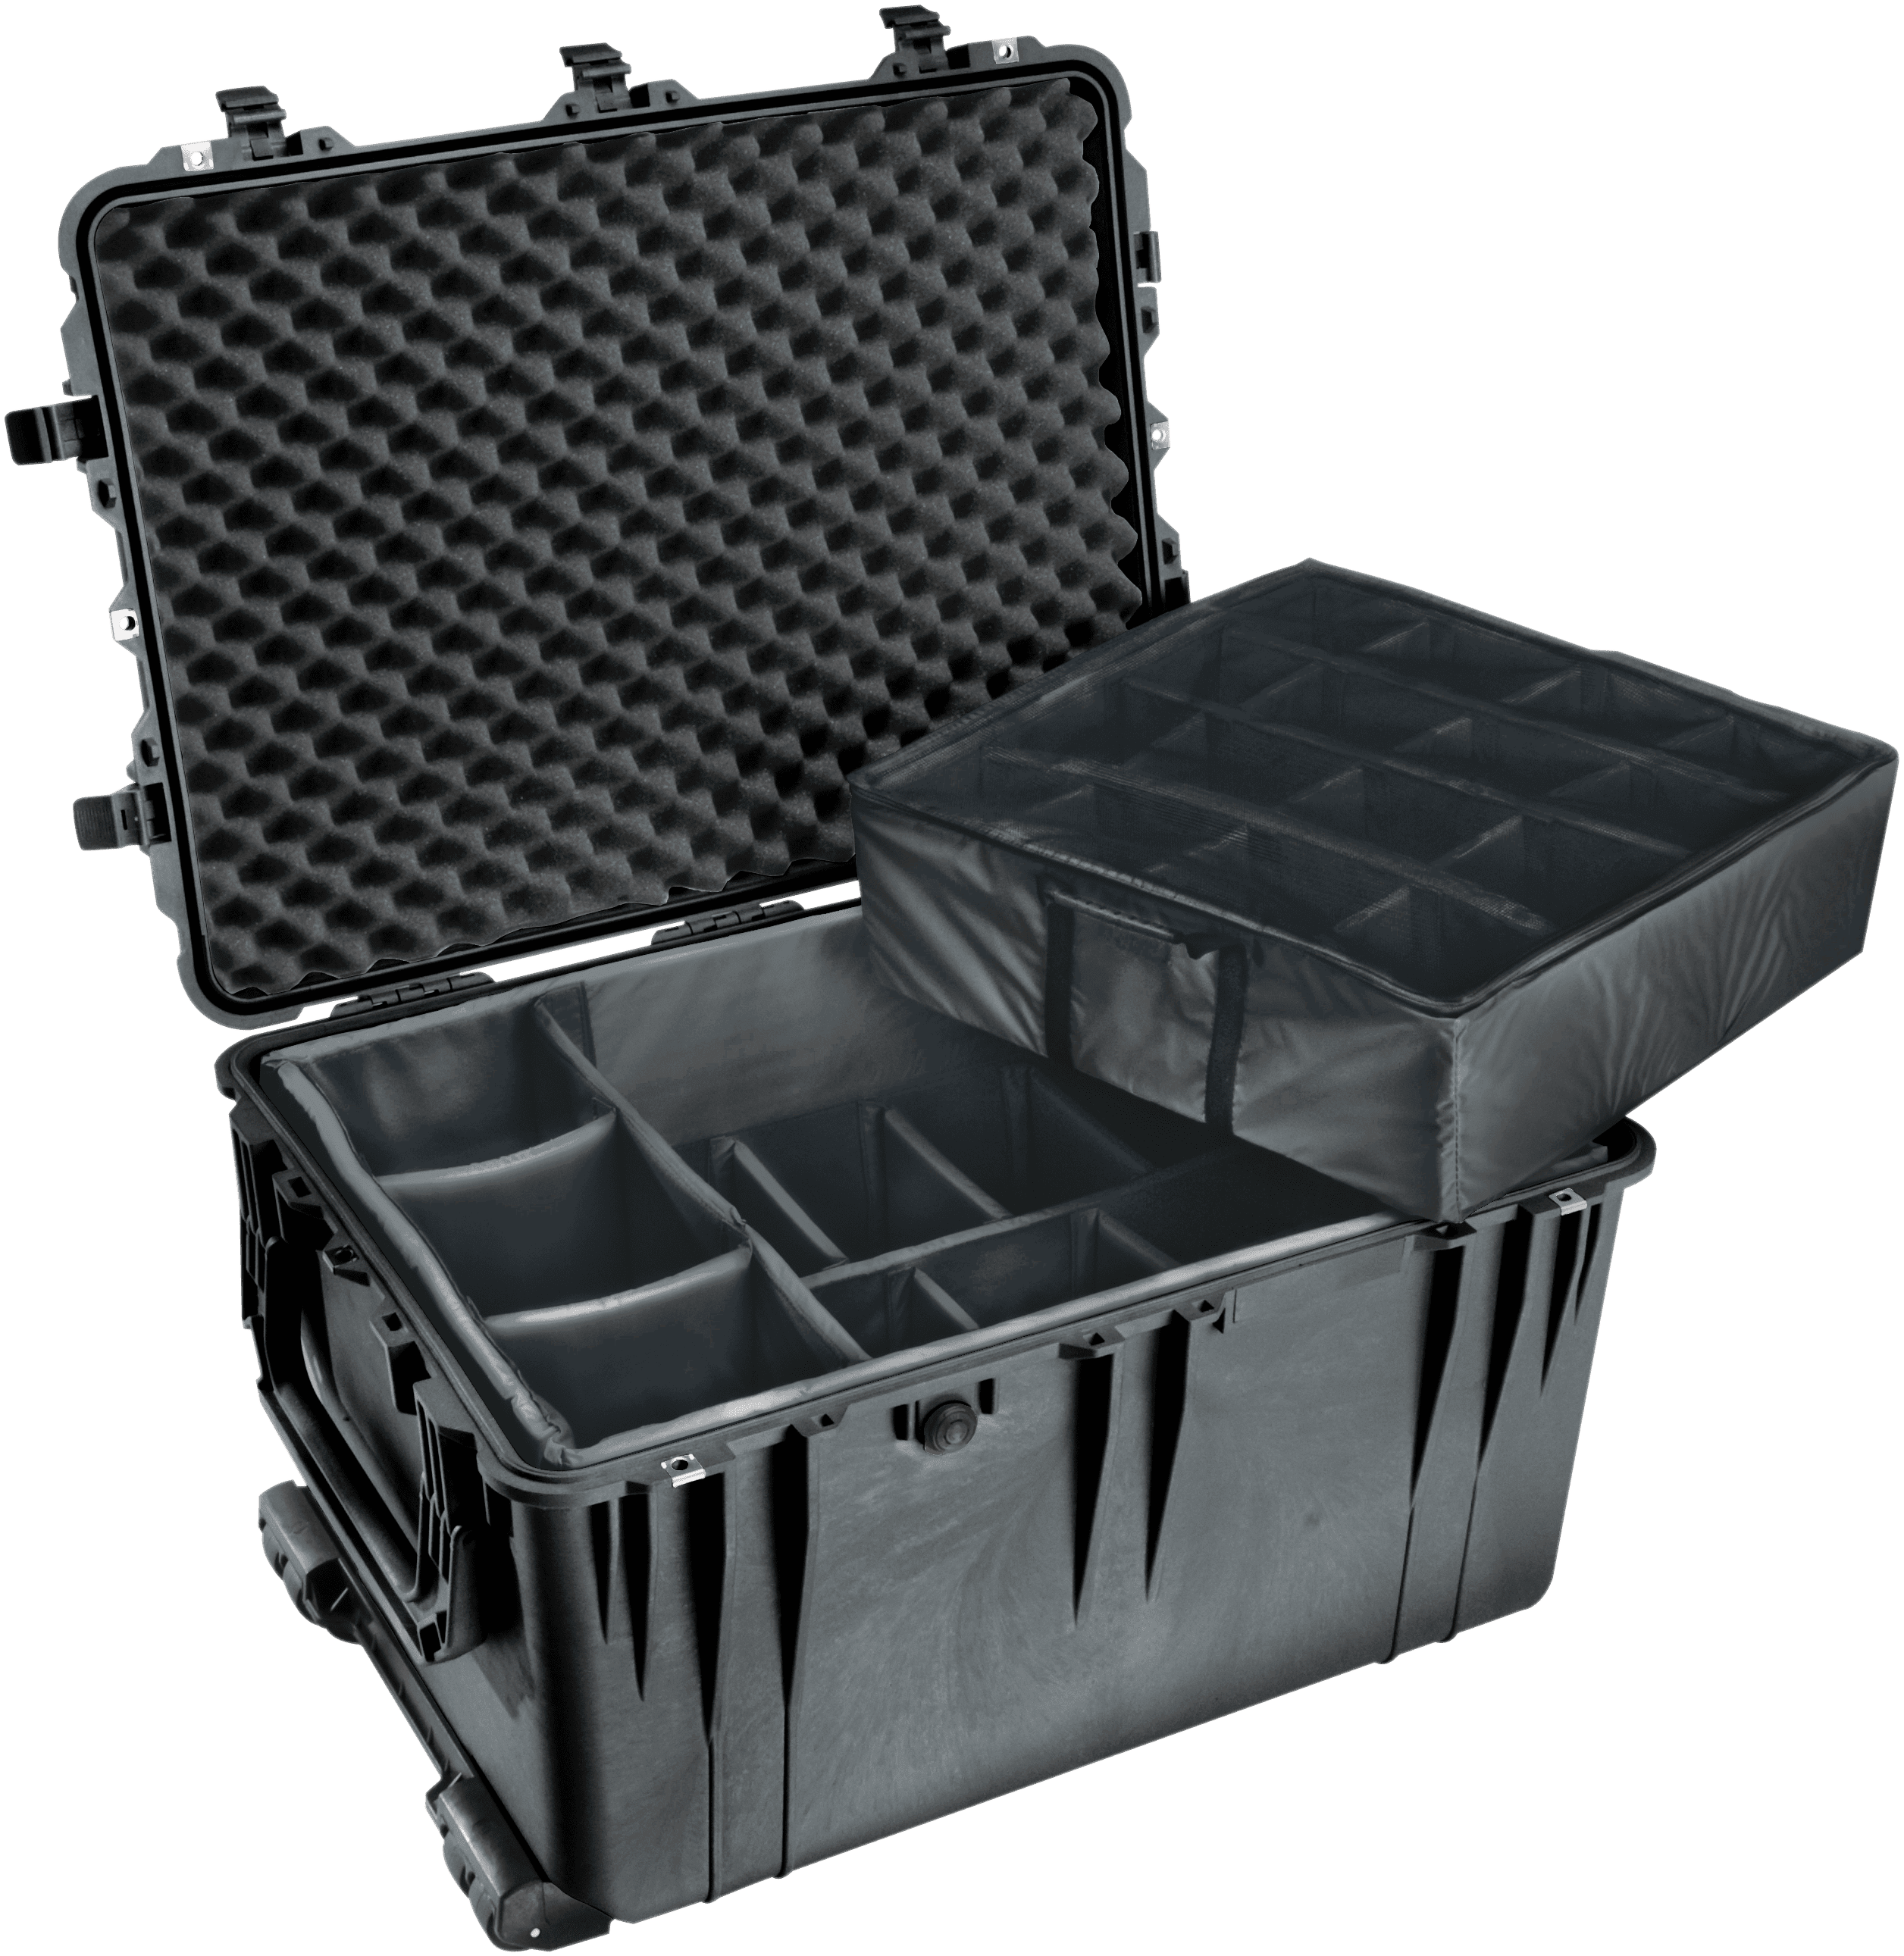 Pelican Products 1660 Protector Case - Black, Padded Dividers